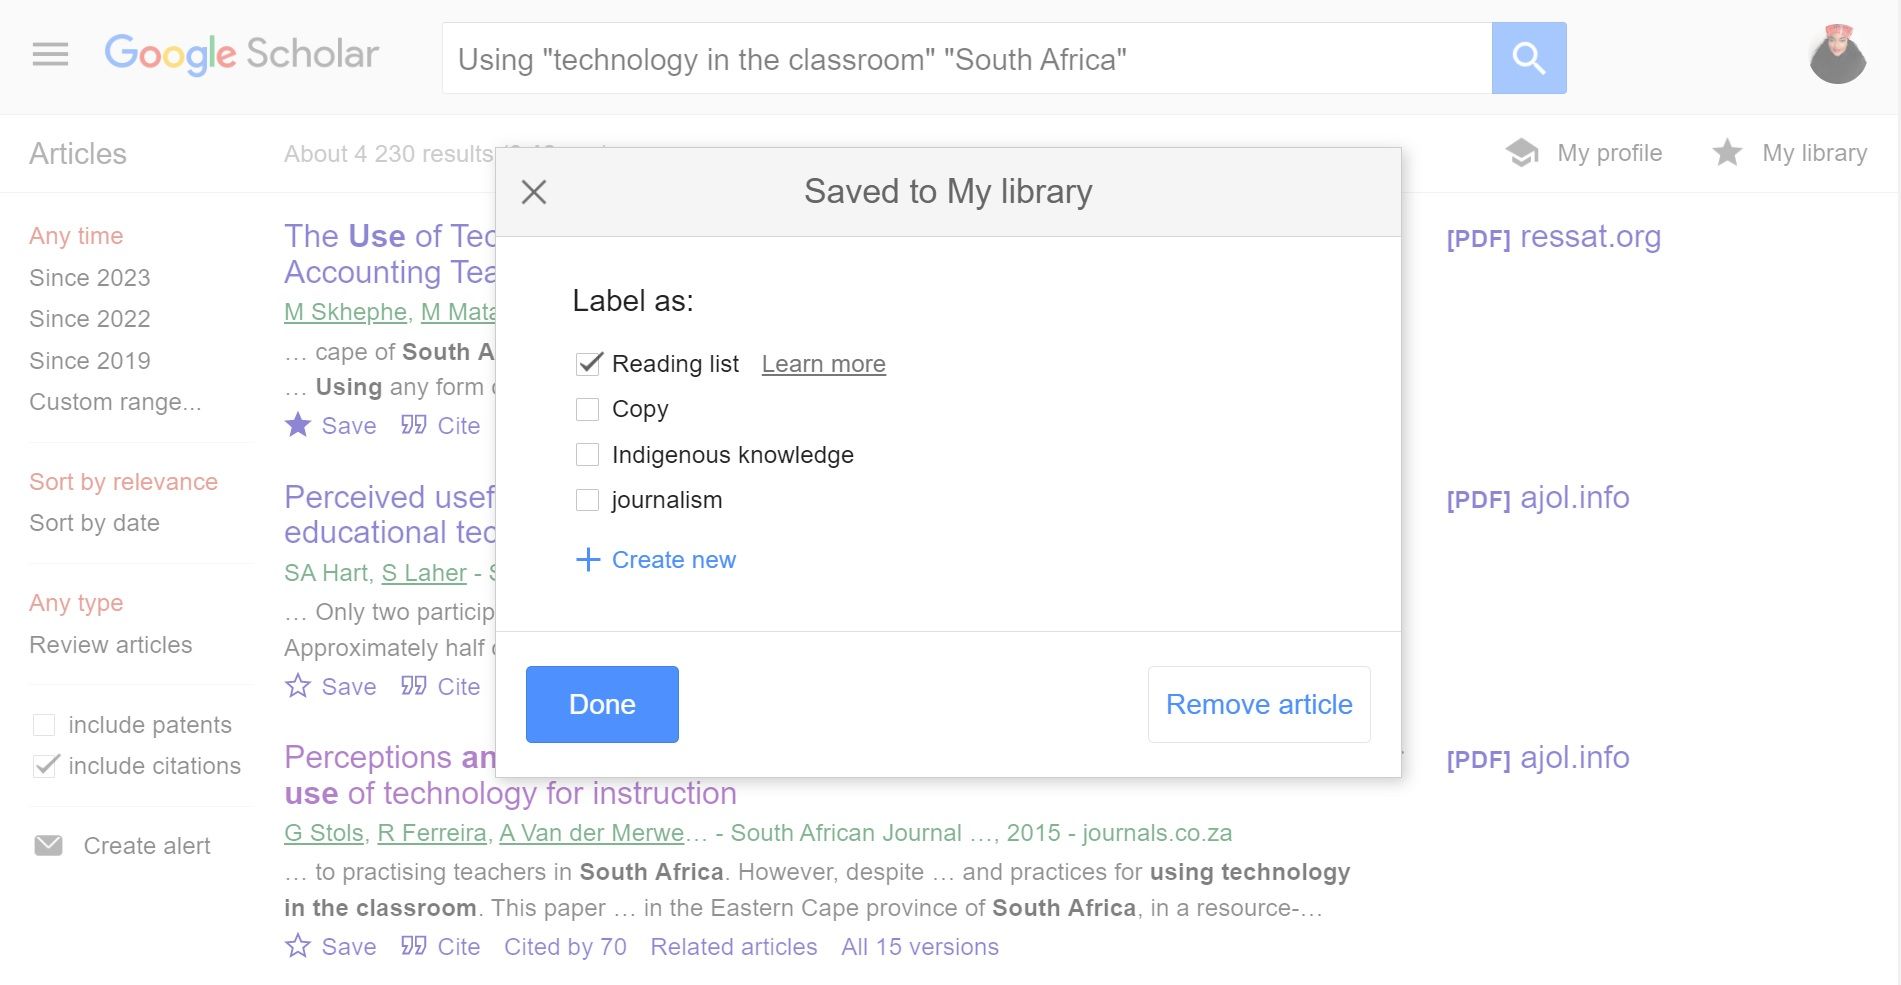 Saving articles in library